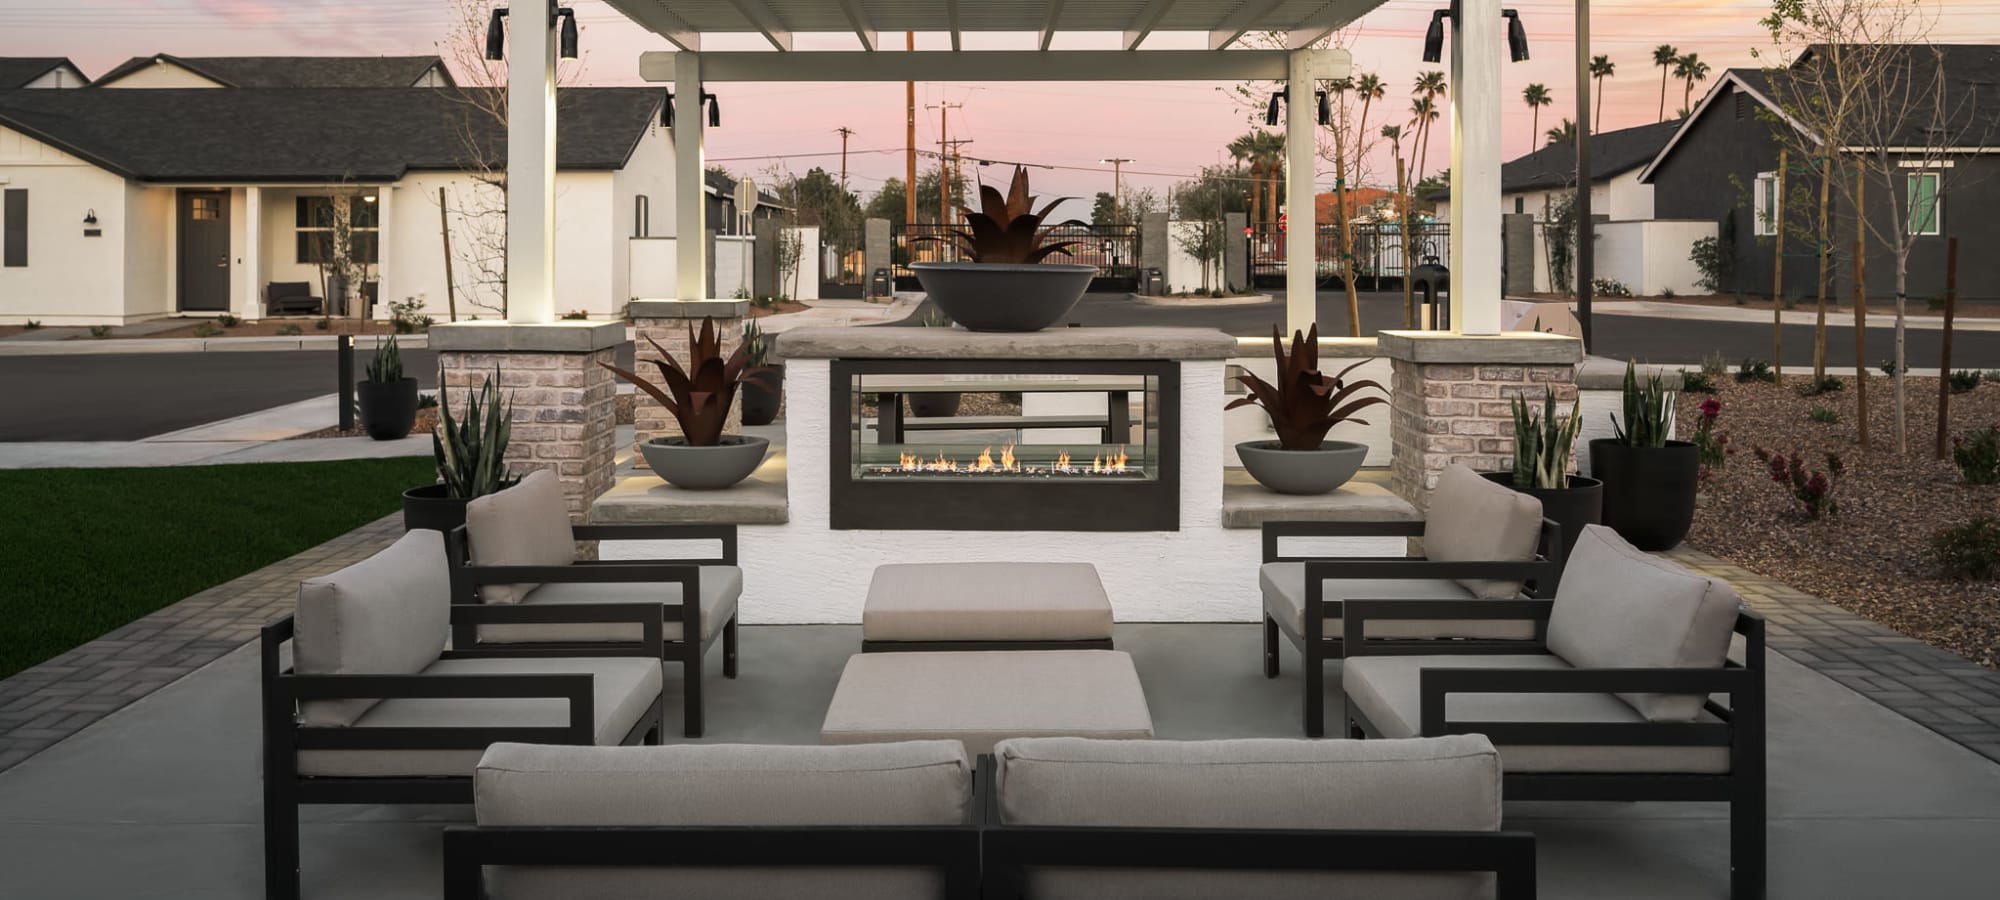 Luxury community seating area at Cyrene at South Mountain in Phoenix, Arizona